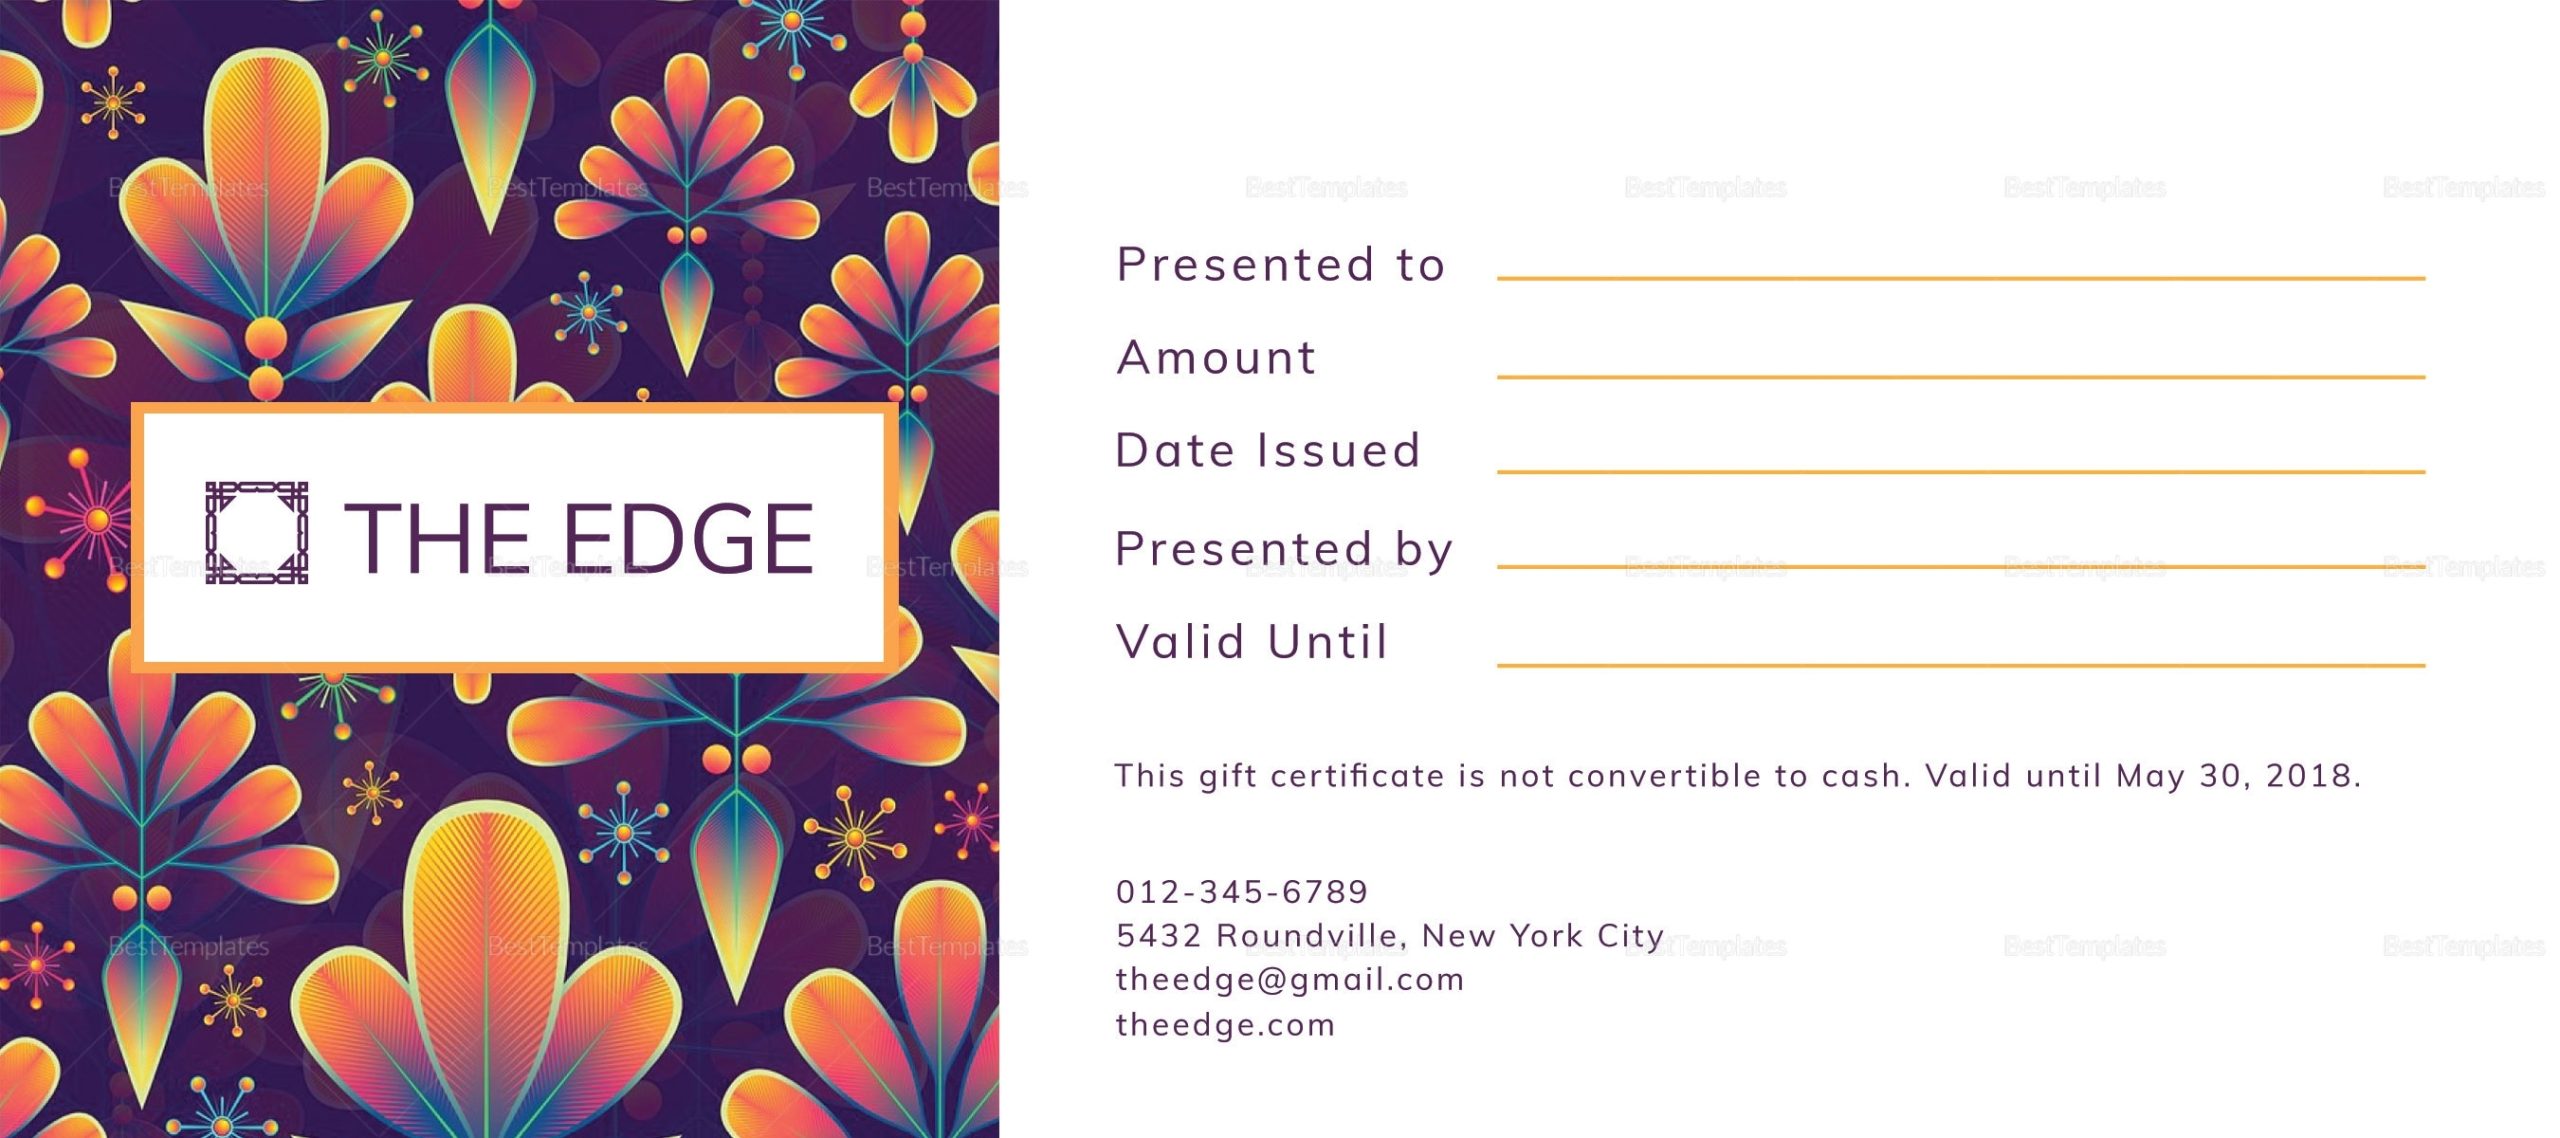 Gift Certificate Design Template In Psd, Word, Publisher, Illustrator within Gift Certificate Template Indesign